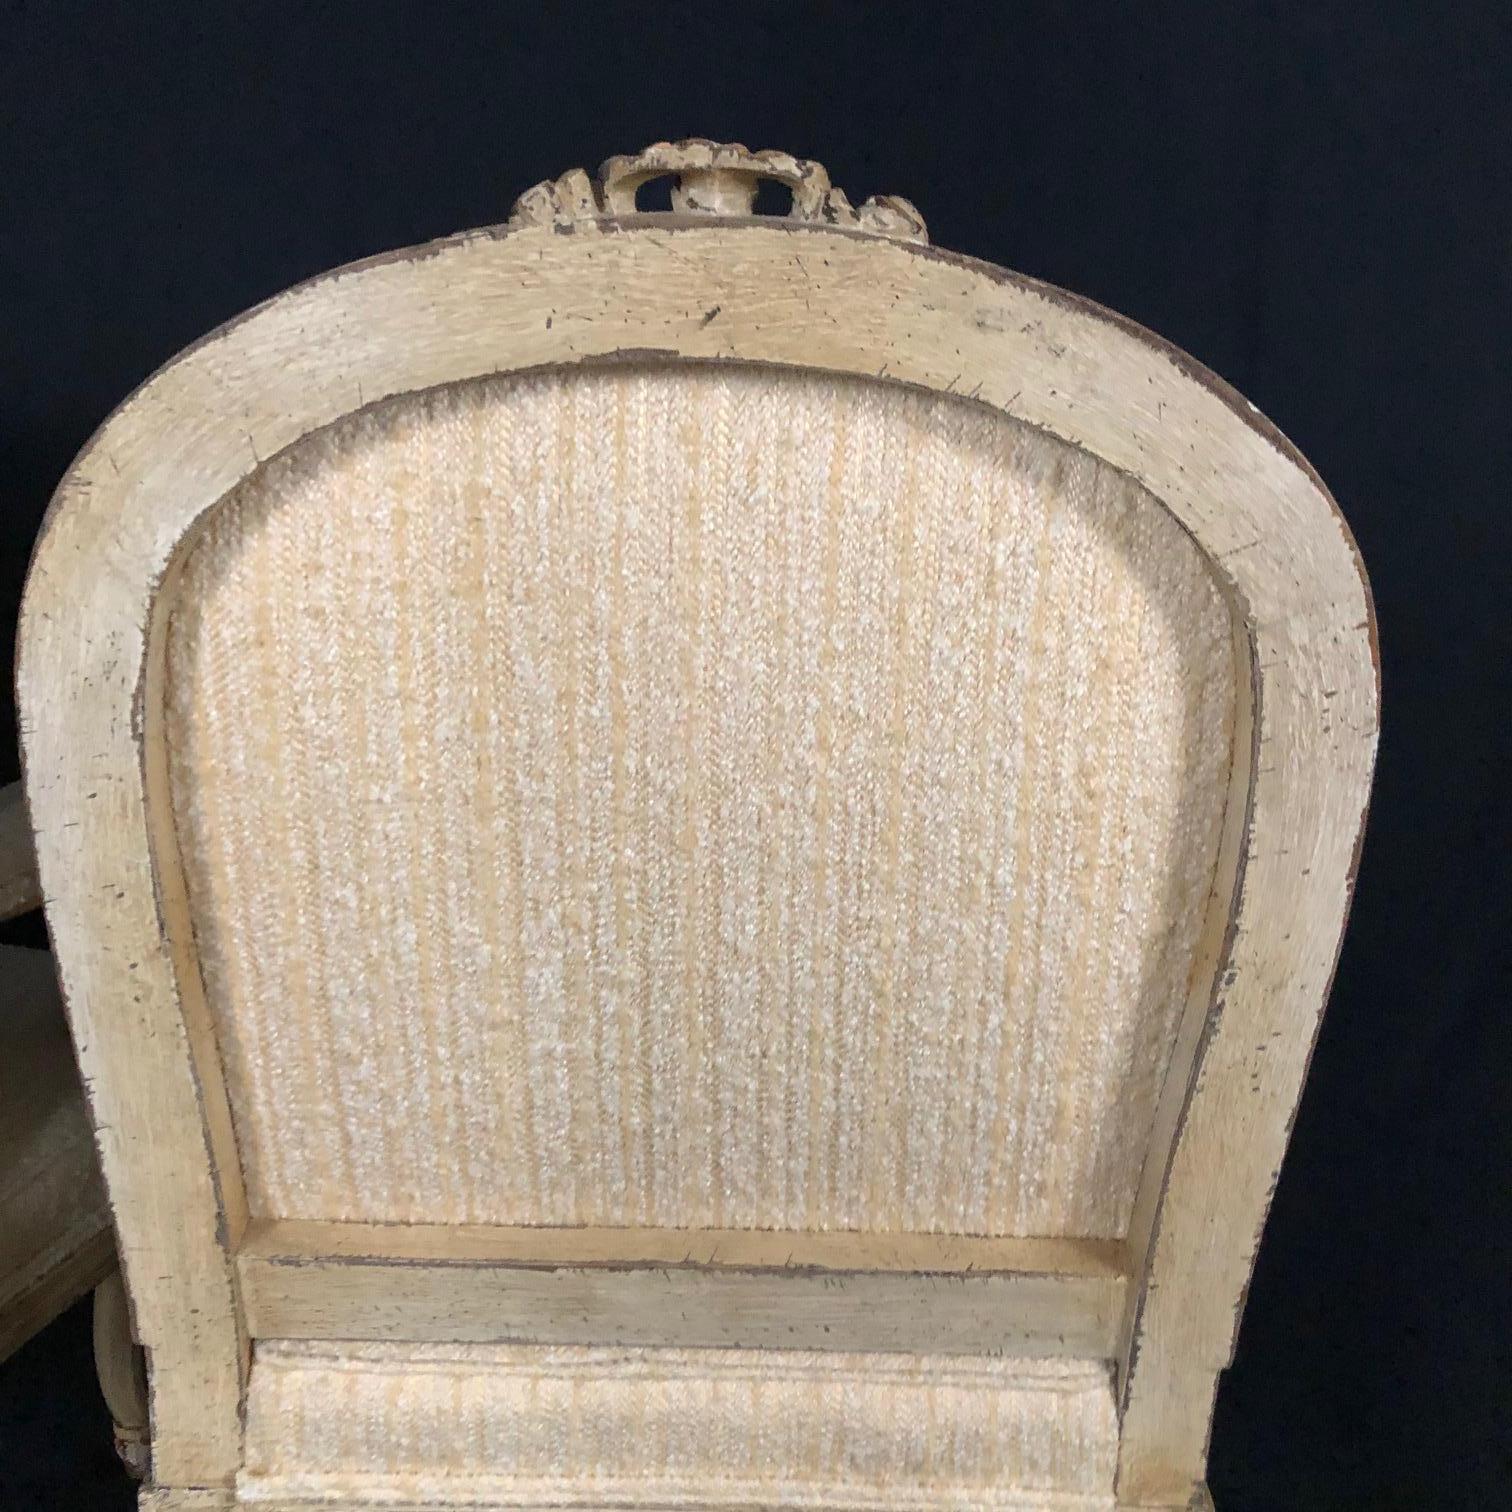  Pair of exquisite painted French bergère armchairs with ivory and cream paint and immaculate complementary upholstery, circa 1940s. Reupholstered in beautiful and tasteful textured ivory and cream material. Immaculate! 
arm height 25.5
#5248